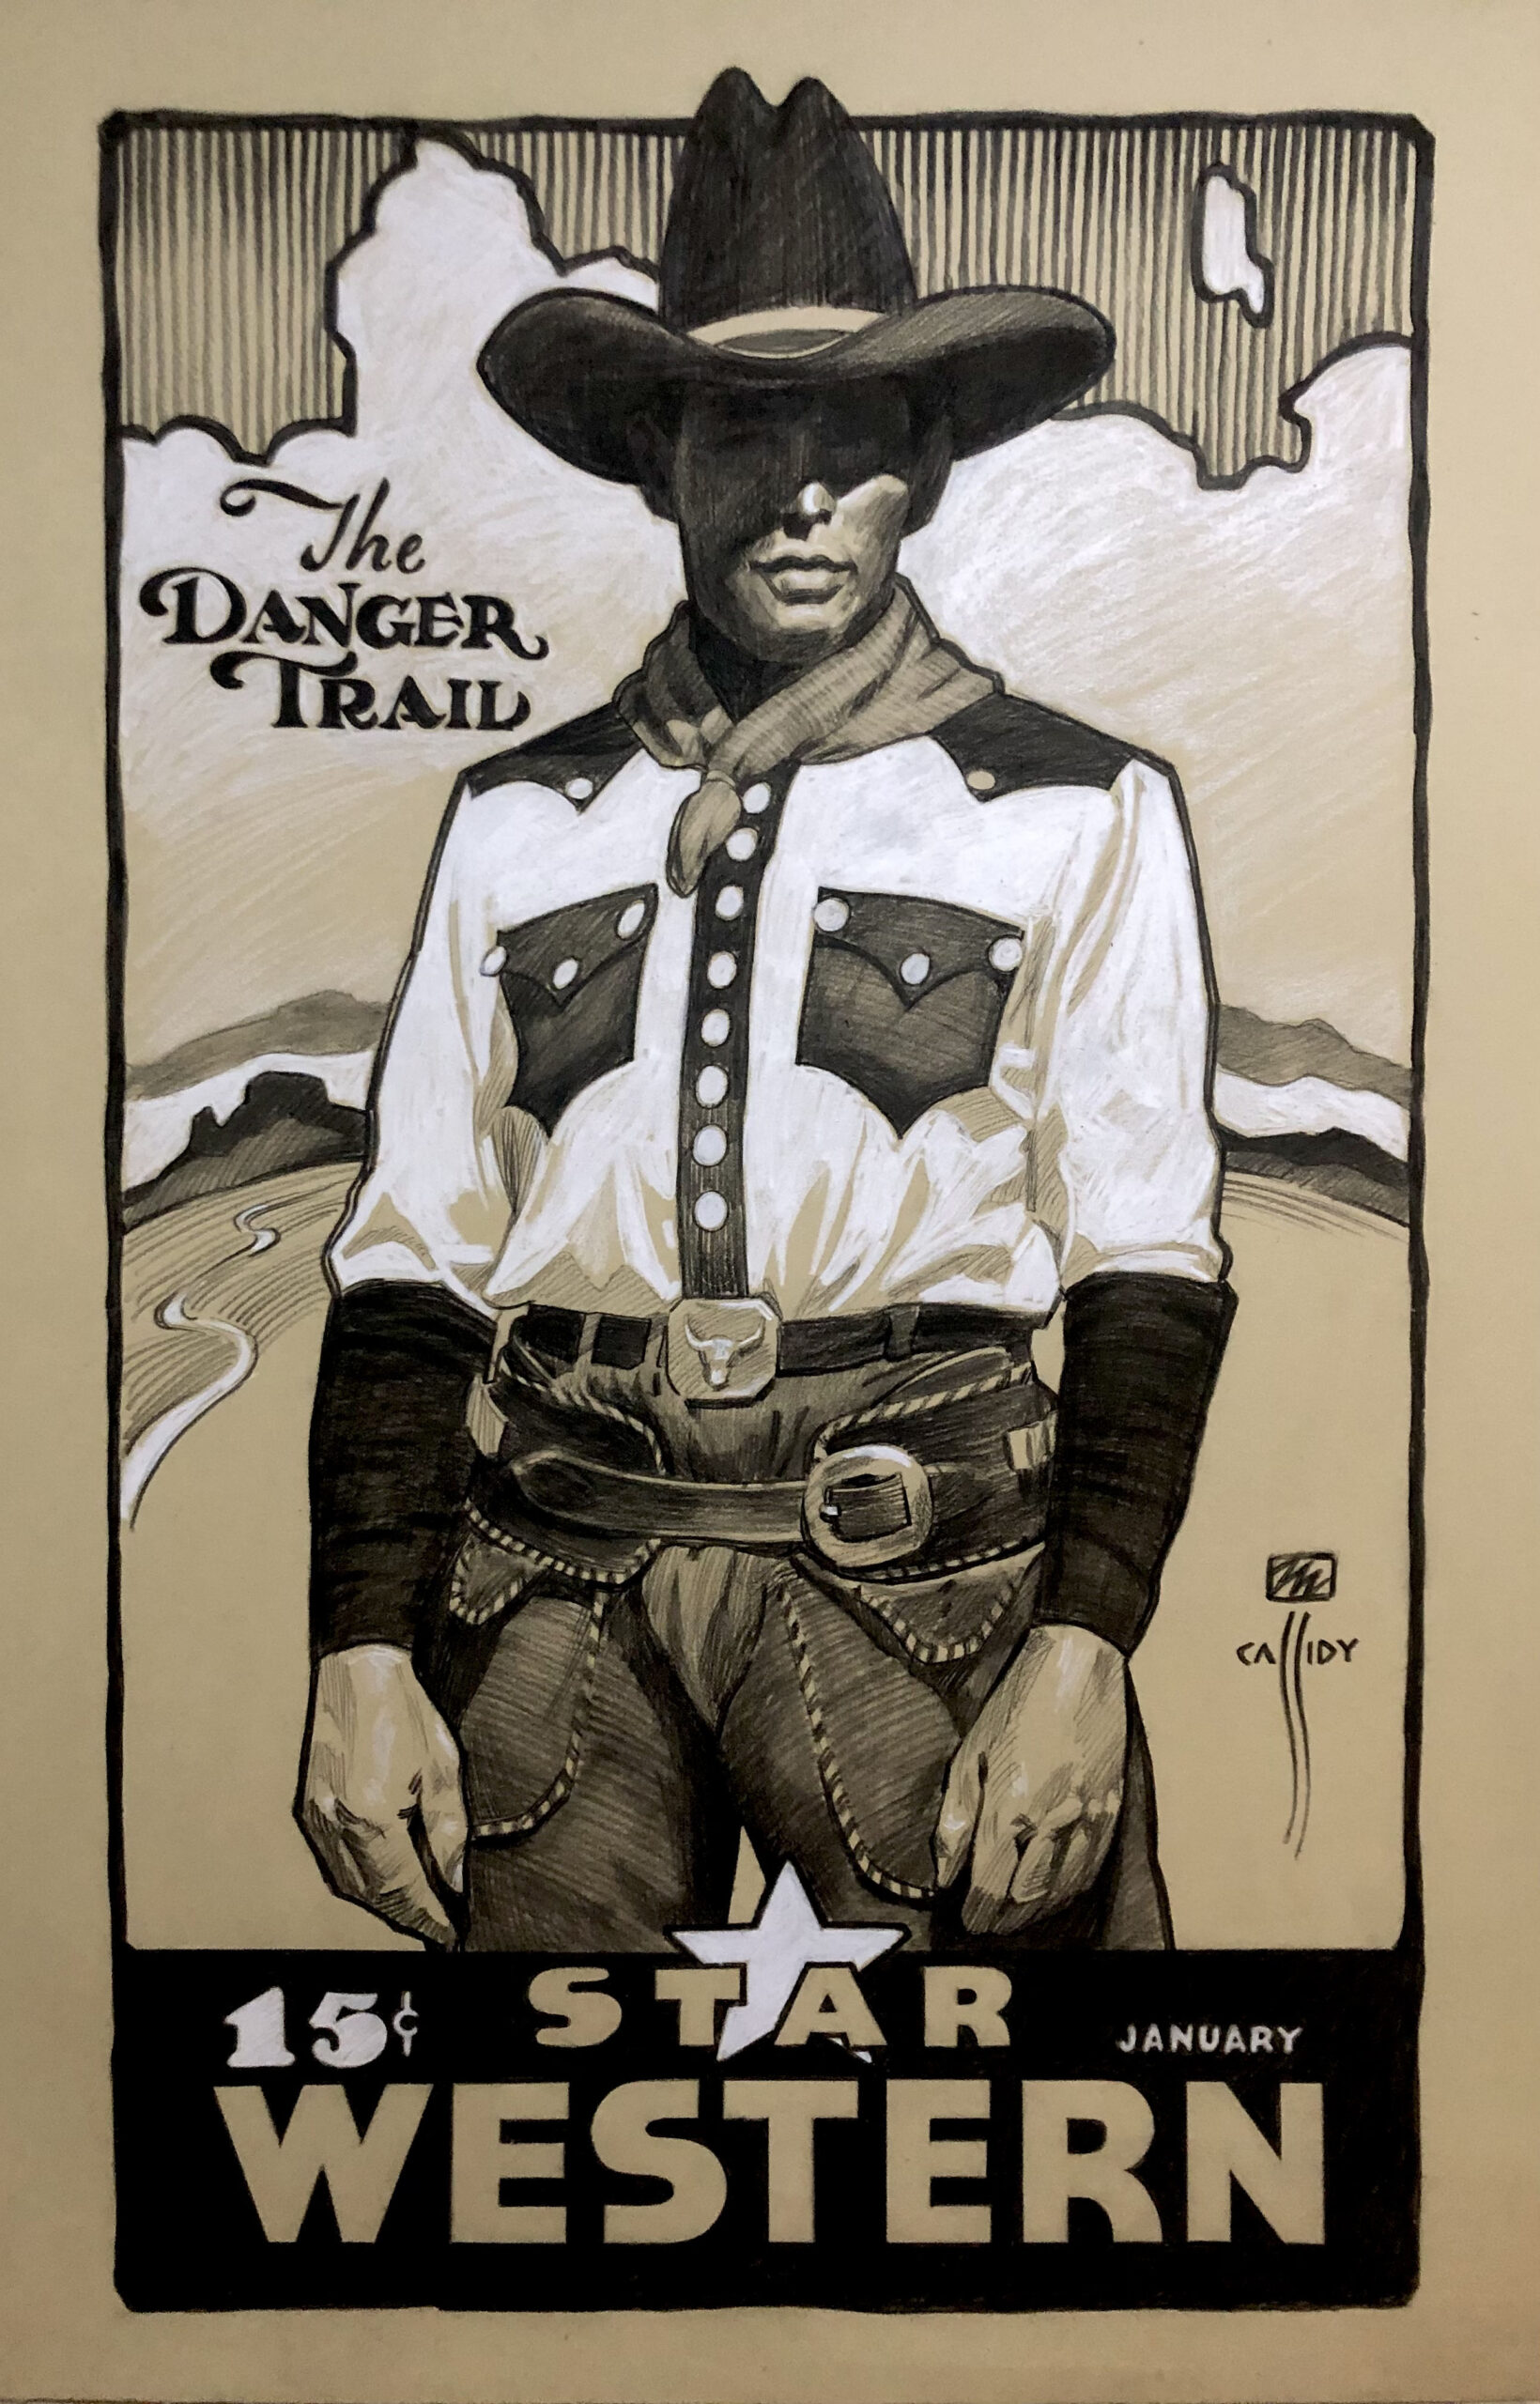 
							

									Michael Cassidy									Star Western, The Danger Trail 									charcoal pencil on paper<br />
29 x 19 inches									


							